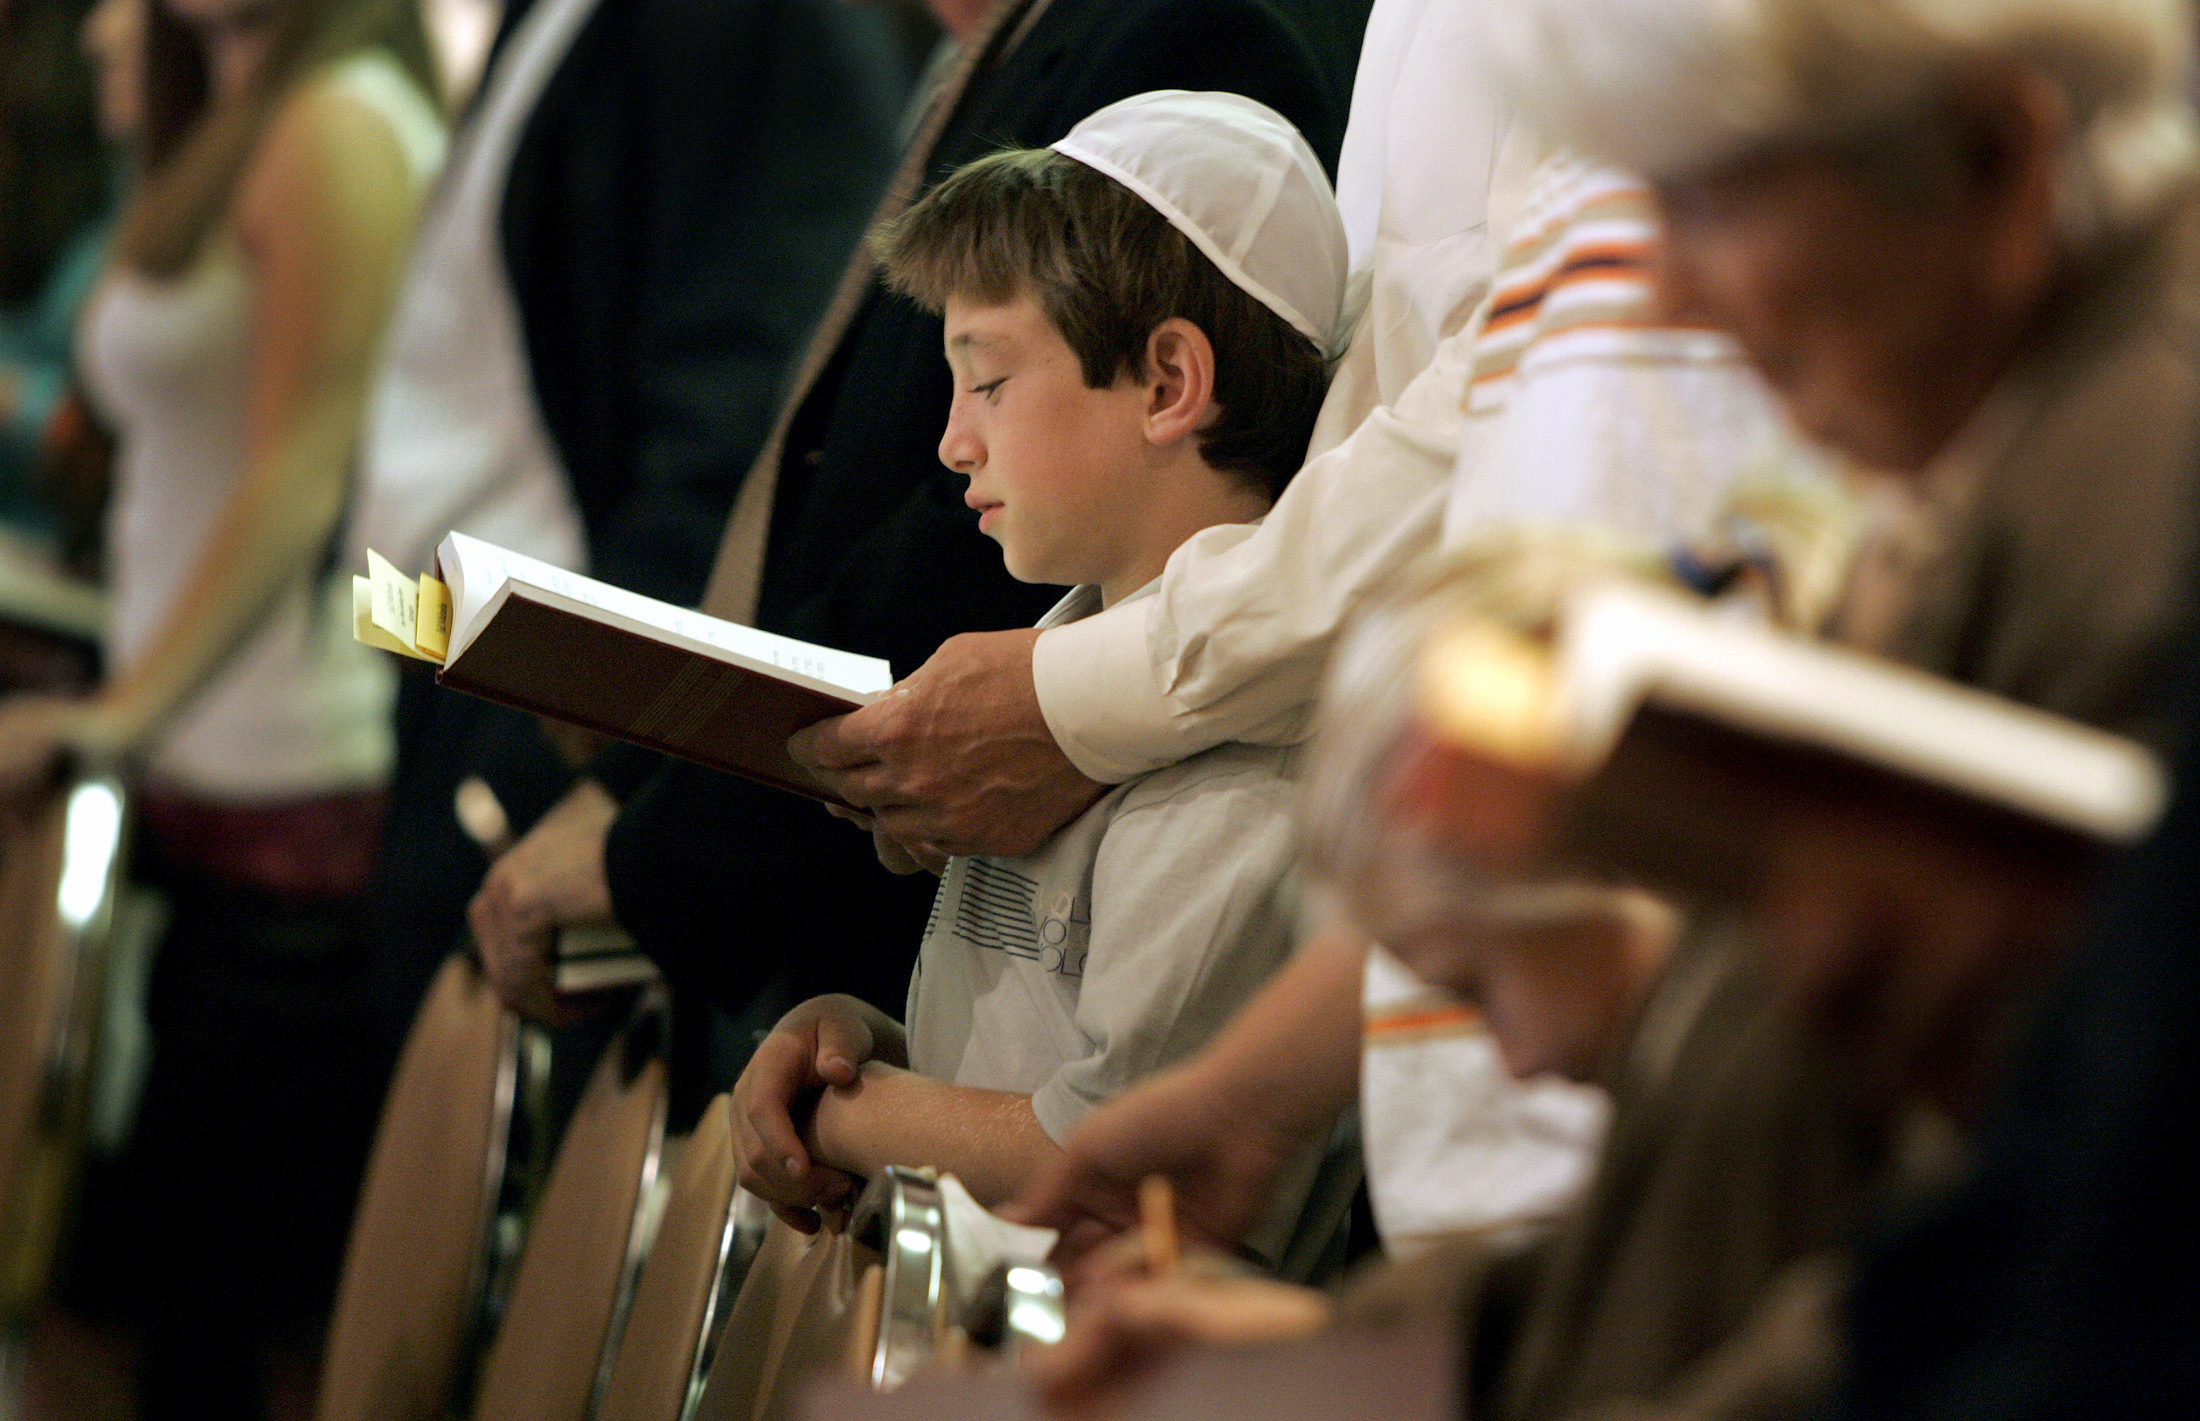 PHOTO: Eric Alperin, 9, of Pacific Palisades, follows along as his father, Jeff, holds the prayer book during the Kol Nidre service marking Yom Kippur at University Synagogue in Brentwood, Calf.